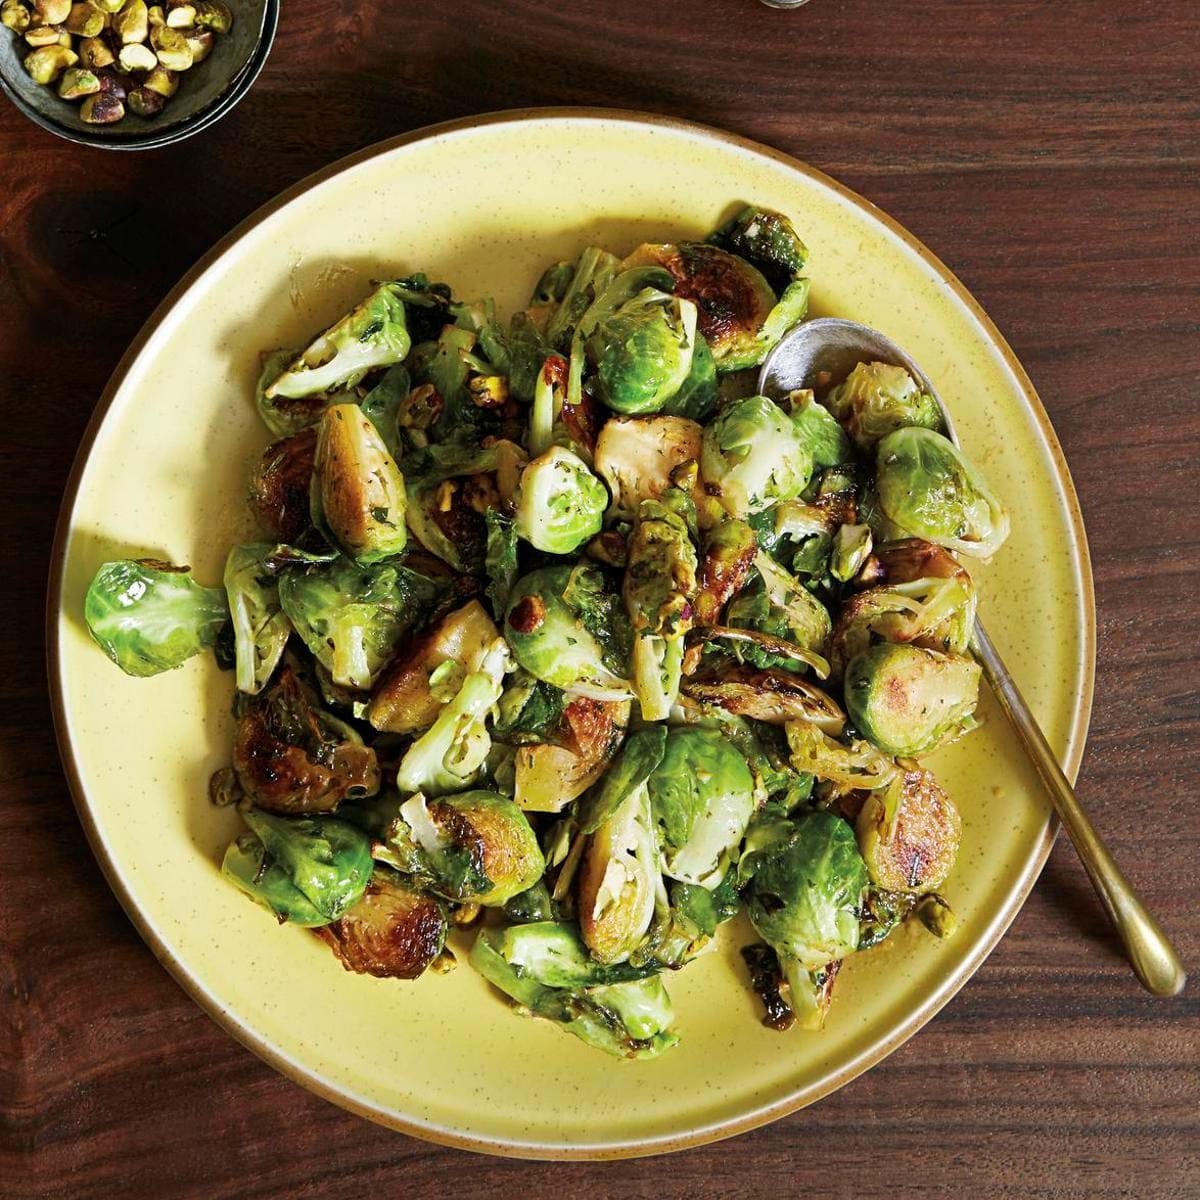 elegant dinner table with roasted Brussel sprouts, pistachios, and wine